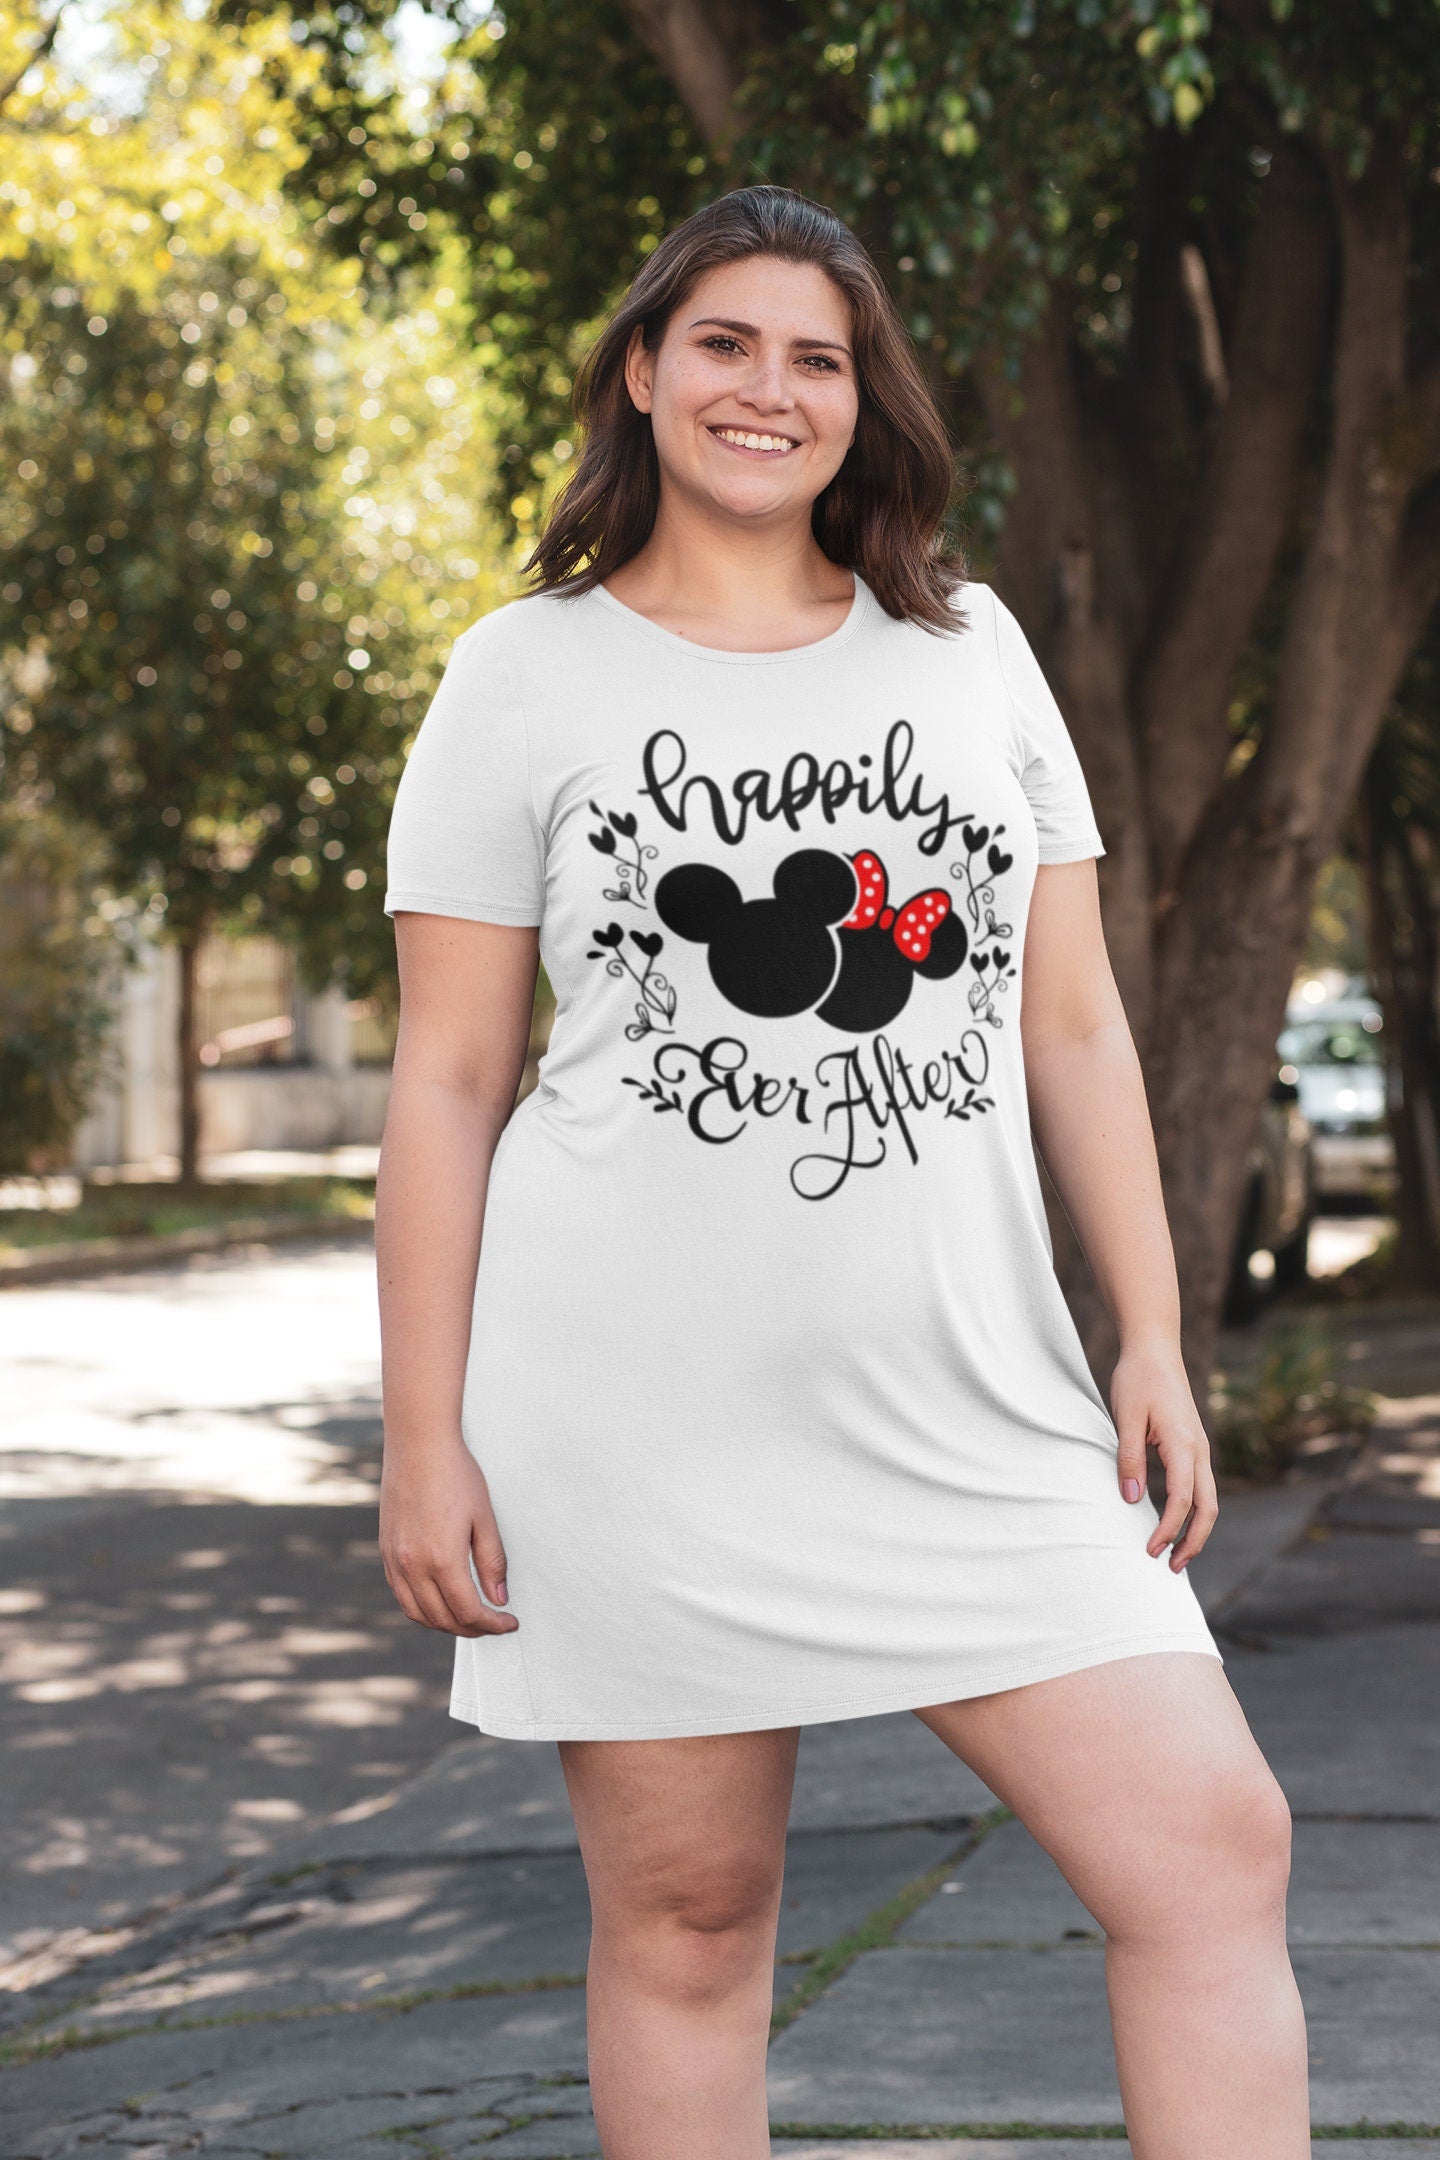 Happily Ever After T-Shirt Dress, Newlywed T-Shirt Dress, Honeymoon T-Shirt Dress, Anniversary Dress, Wedding Party Dress, Wedding Gift